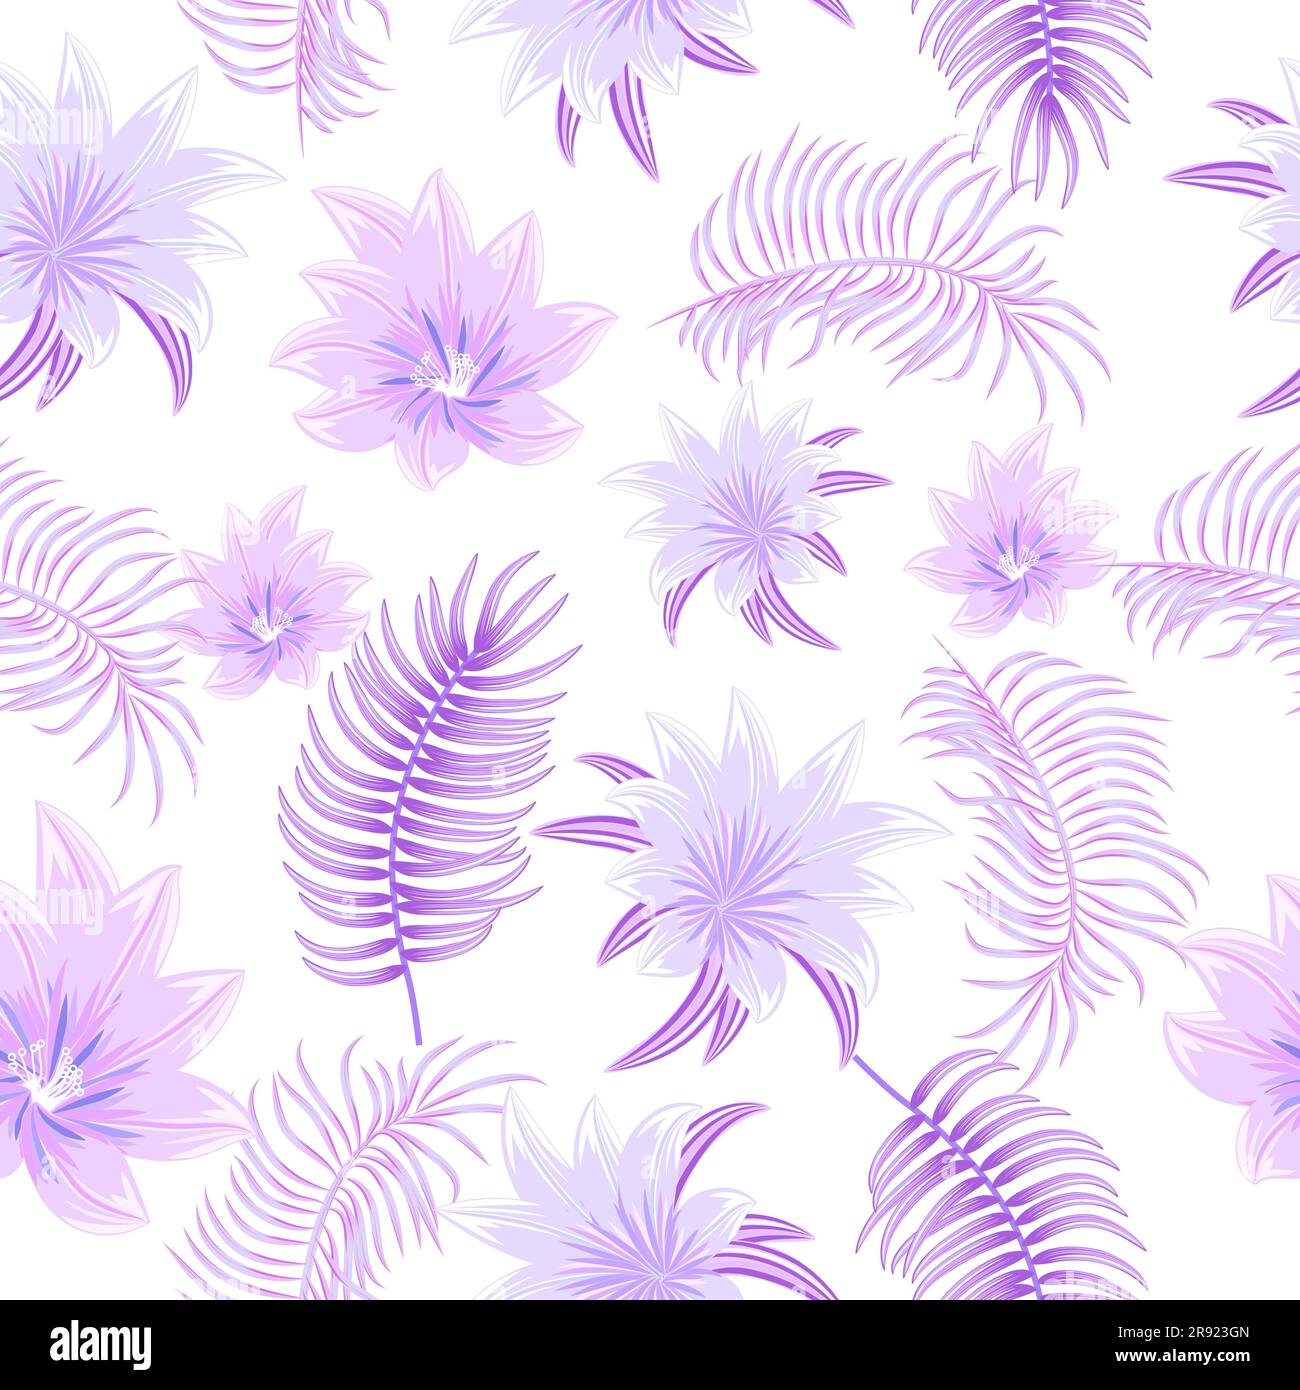 Vector tropical jungle seamless pattern with purple palm trees leaves and flowers, background for wedding, invitation cards,fabric, print. Stock Vector